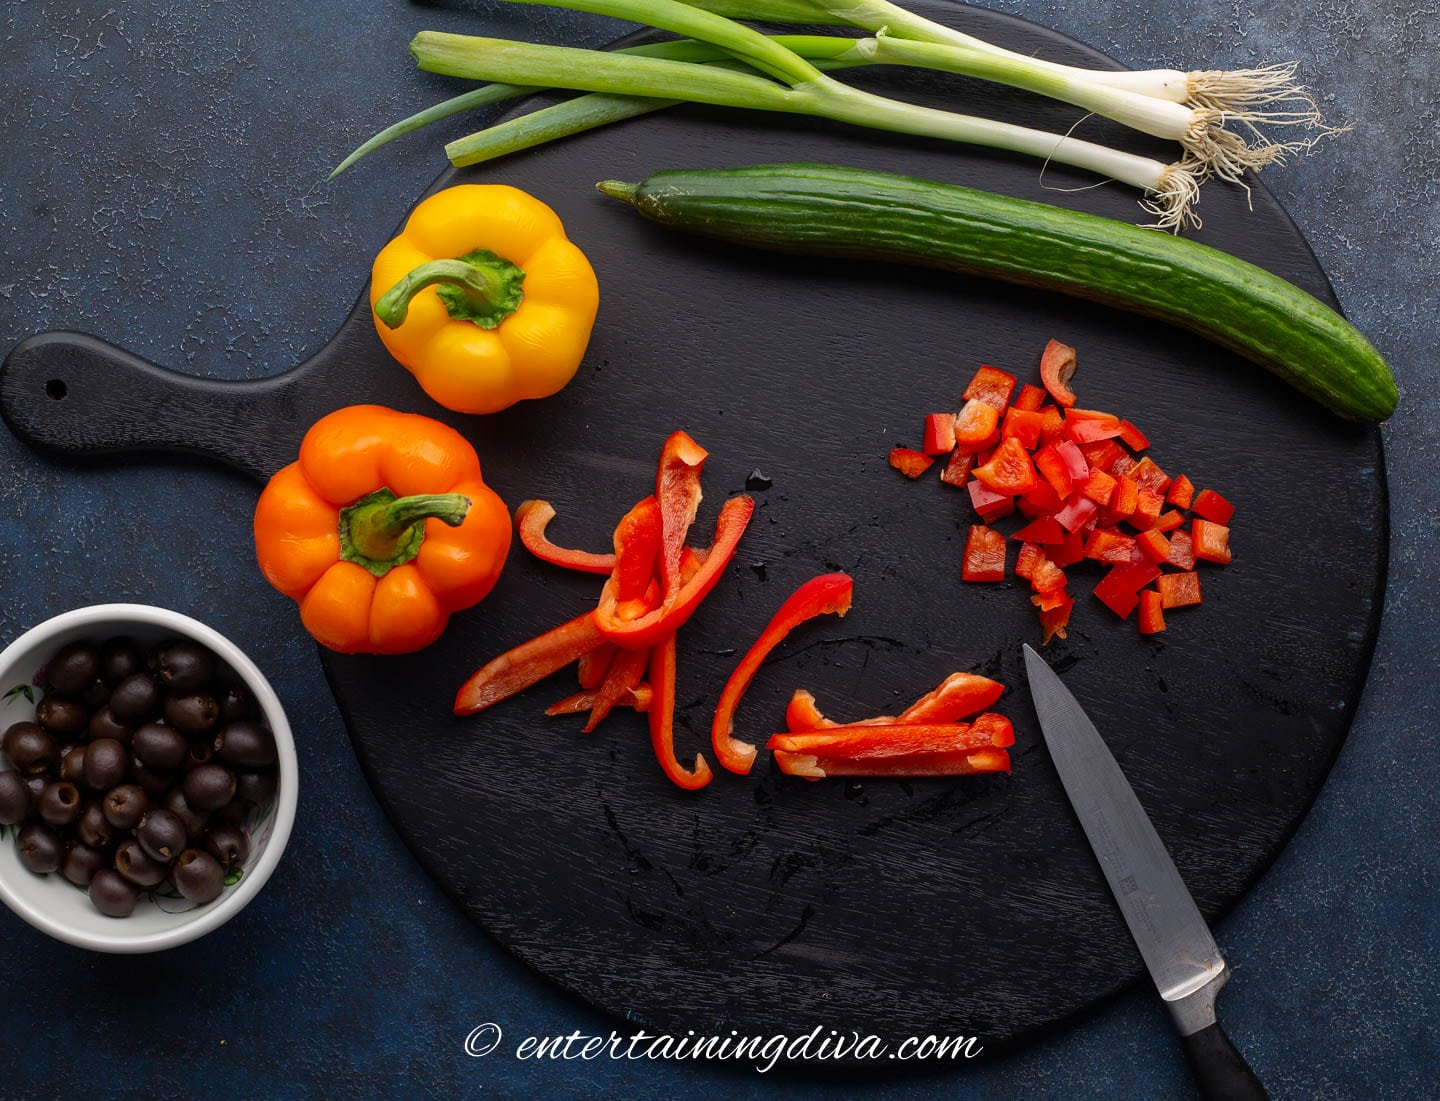 Chopped red peppers on a cutting board with orange and yellow peppers, a cucumber, green onions and black olives